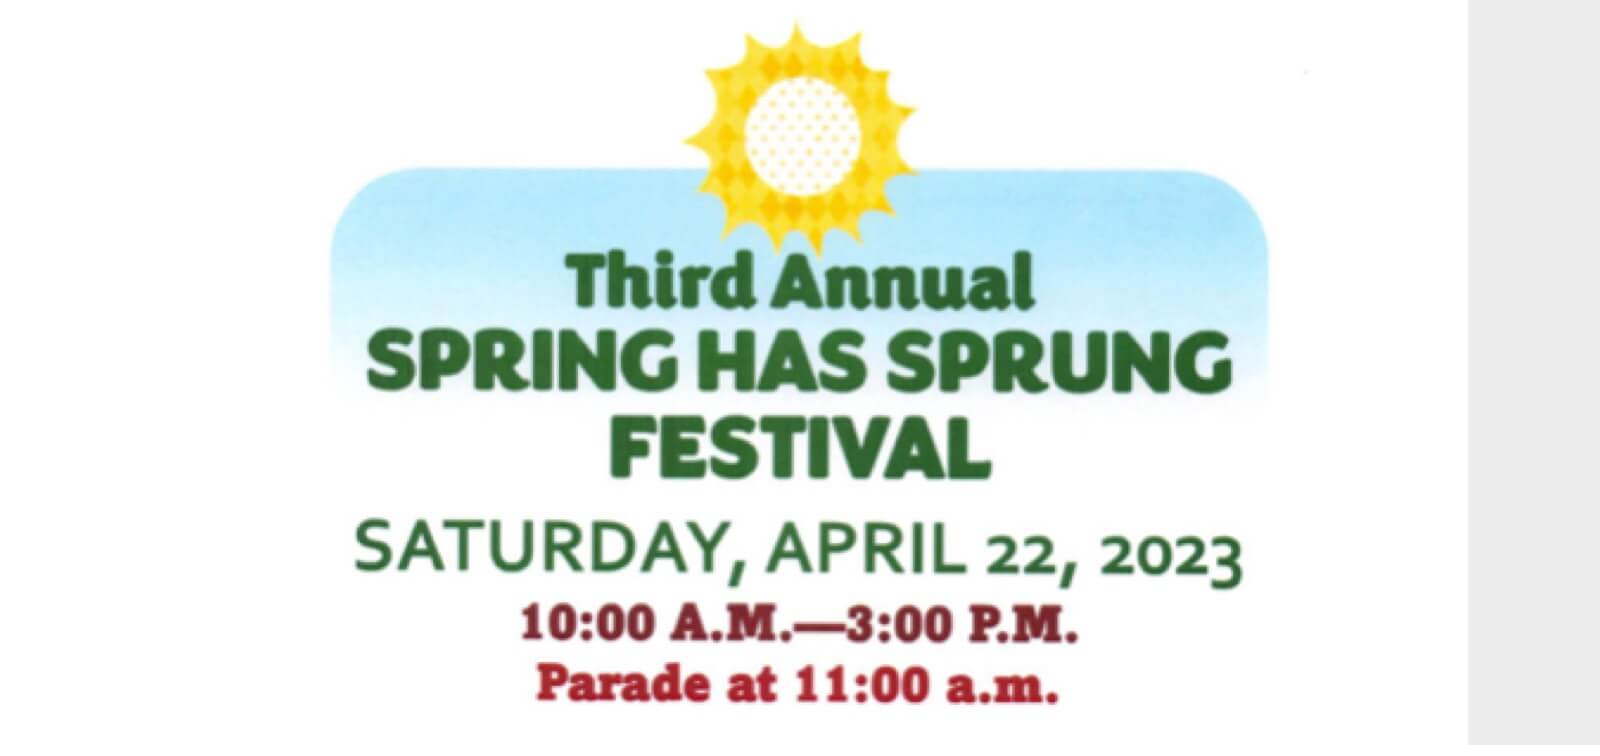 Third Annual Spring has sprung Festival 2023 details in event page